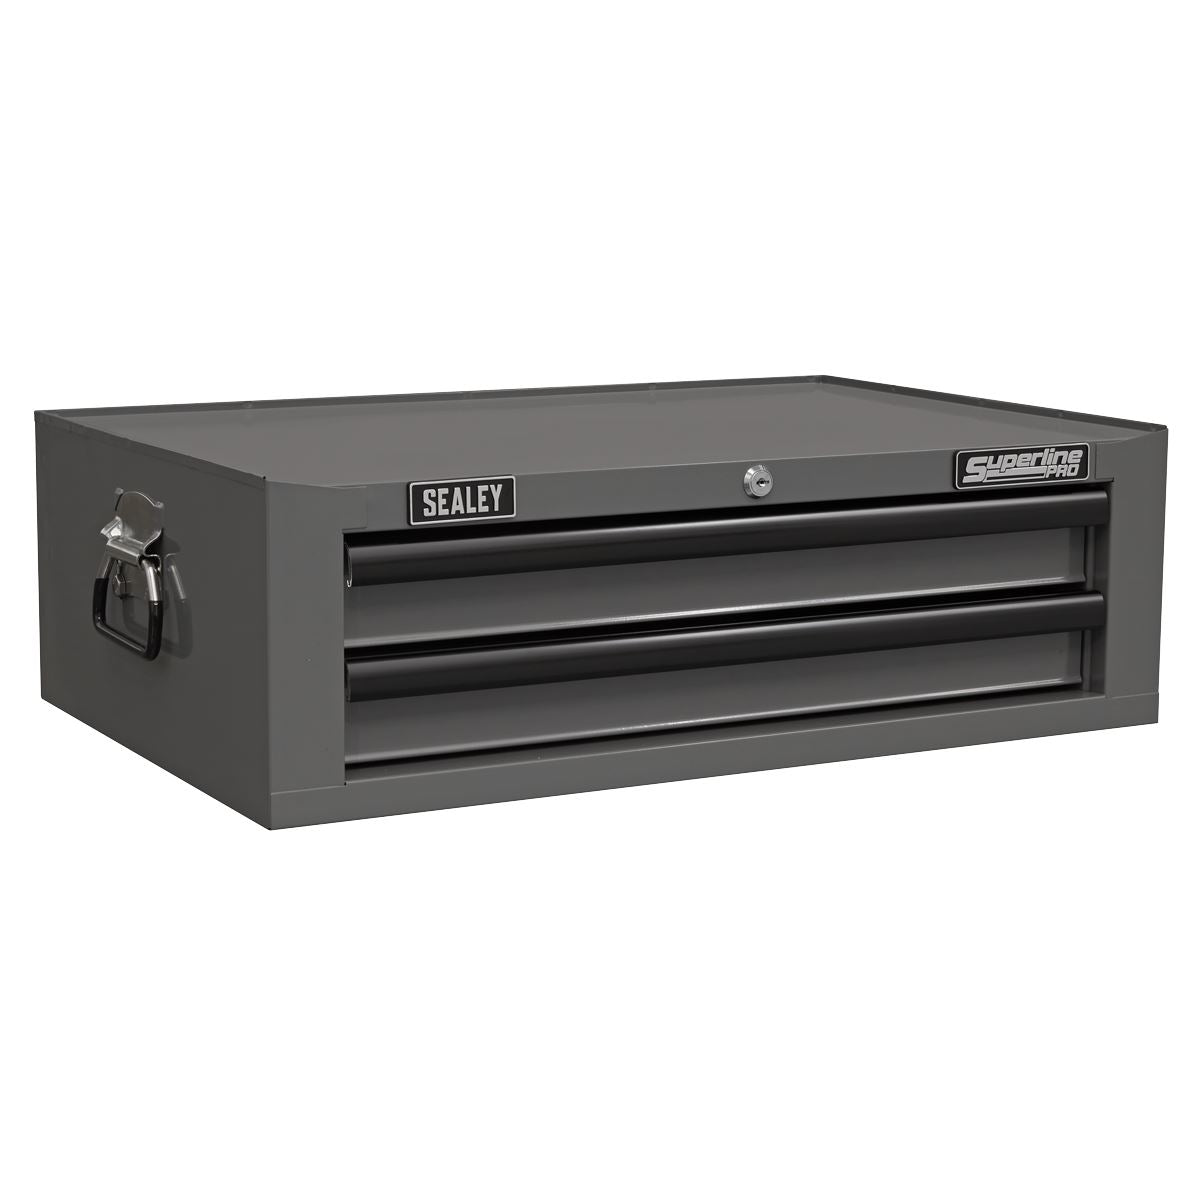 Sealey Superline Pro Mid-Box Tool Chest 2 Drawer with Ball-Bearing Slides - Grey/Black